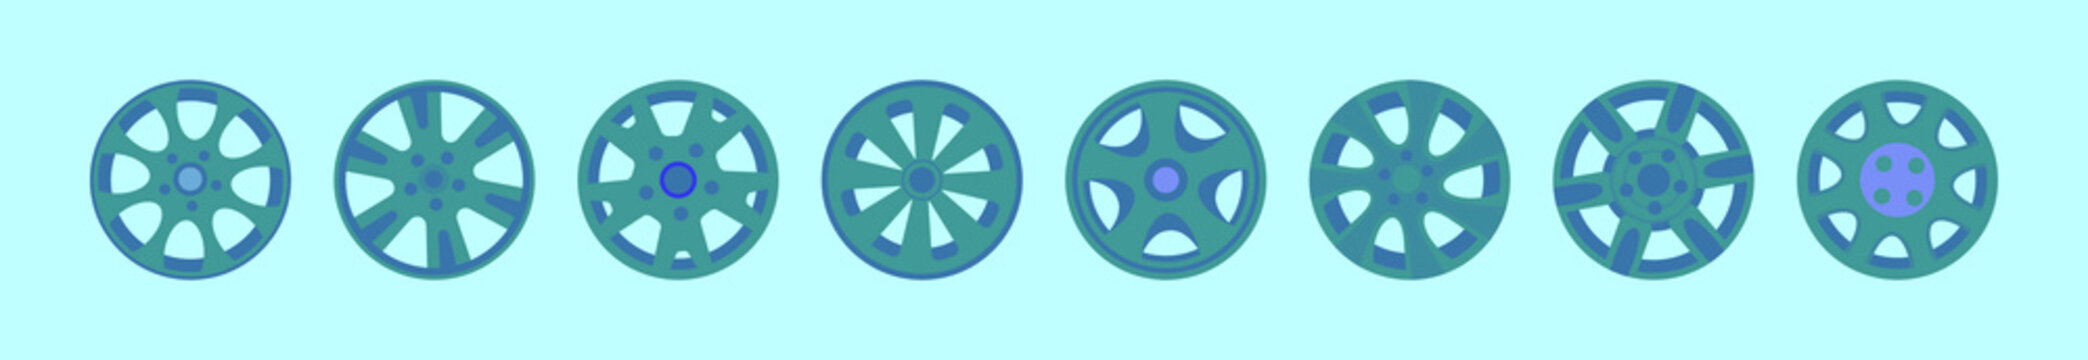 set of hubcap cartoon icon design template with various models. vector illustration isolated on blue background